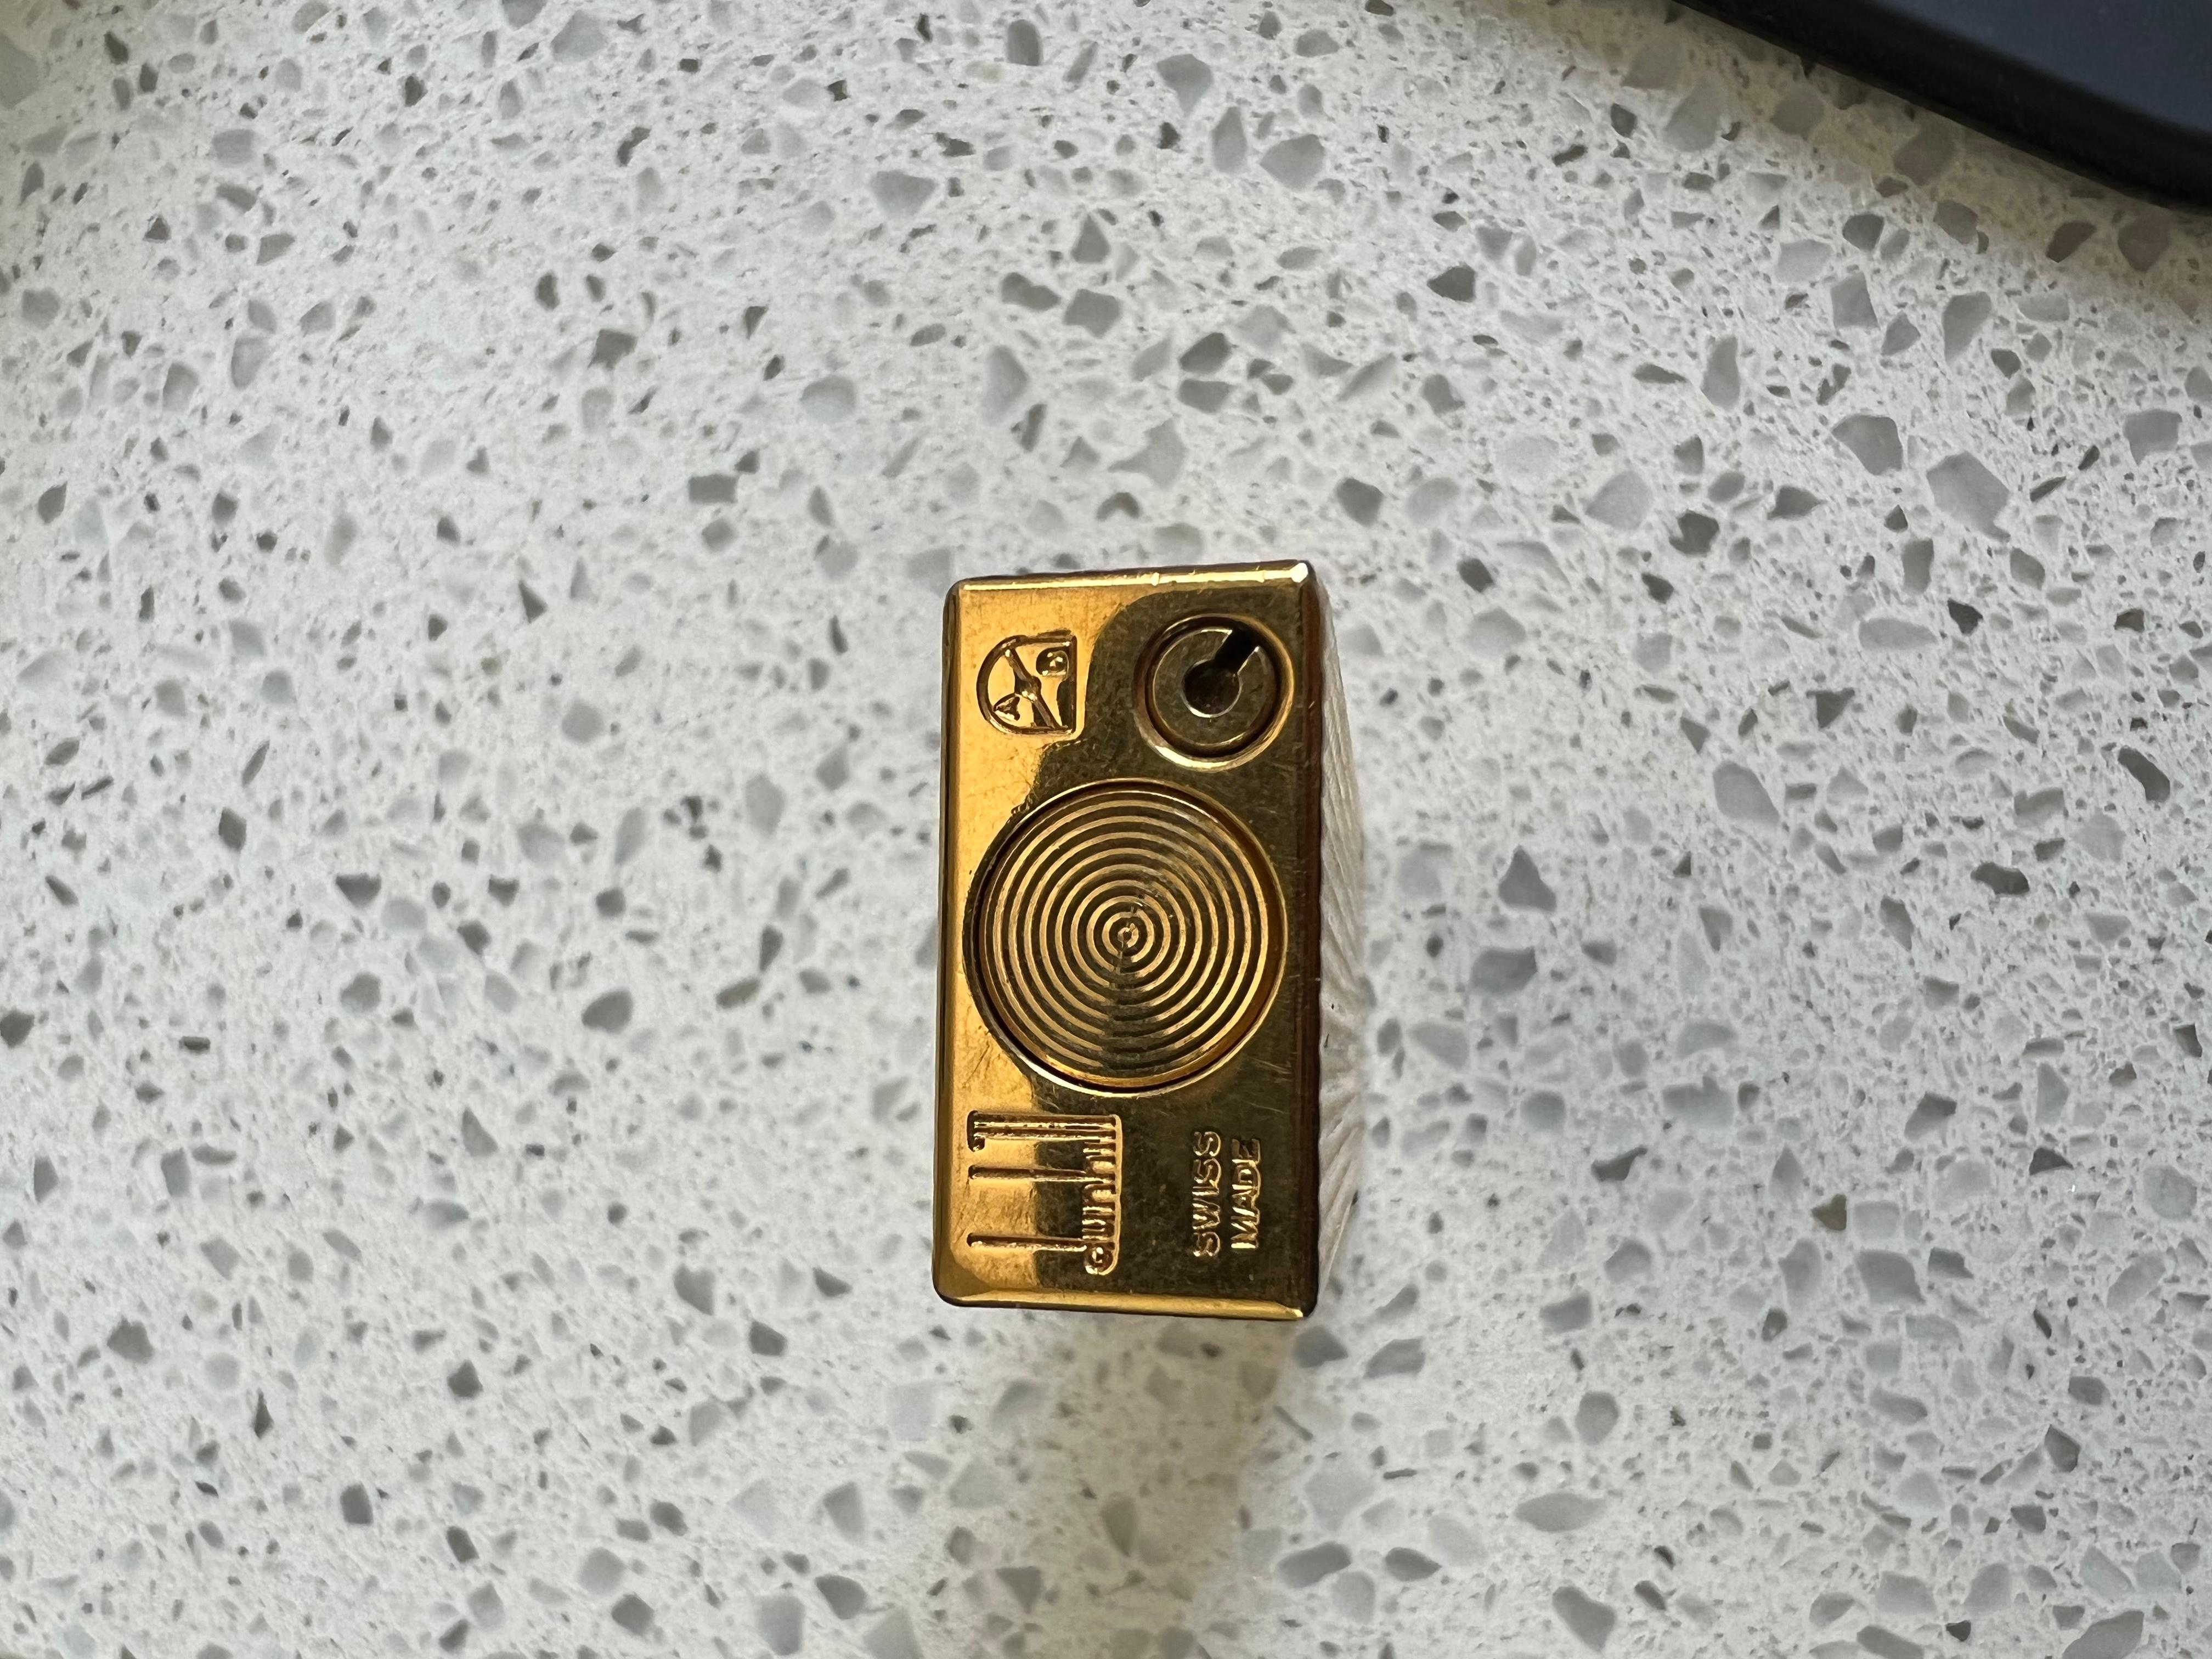 Iconic Dunhill Gold-Plated Cigarette Lighter with Original Red Lather Case In Excellent Condition For Sale In New York, NY